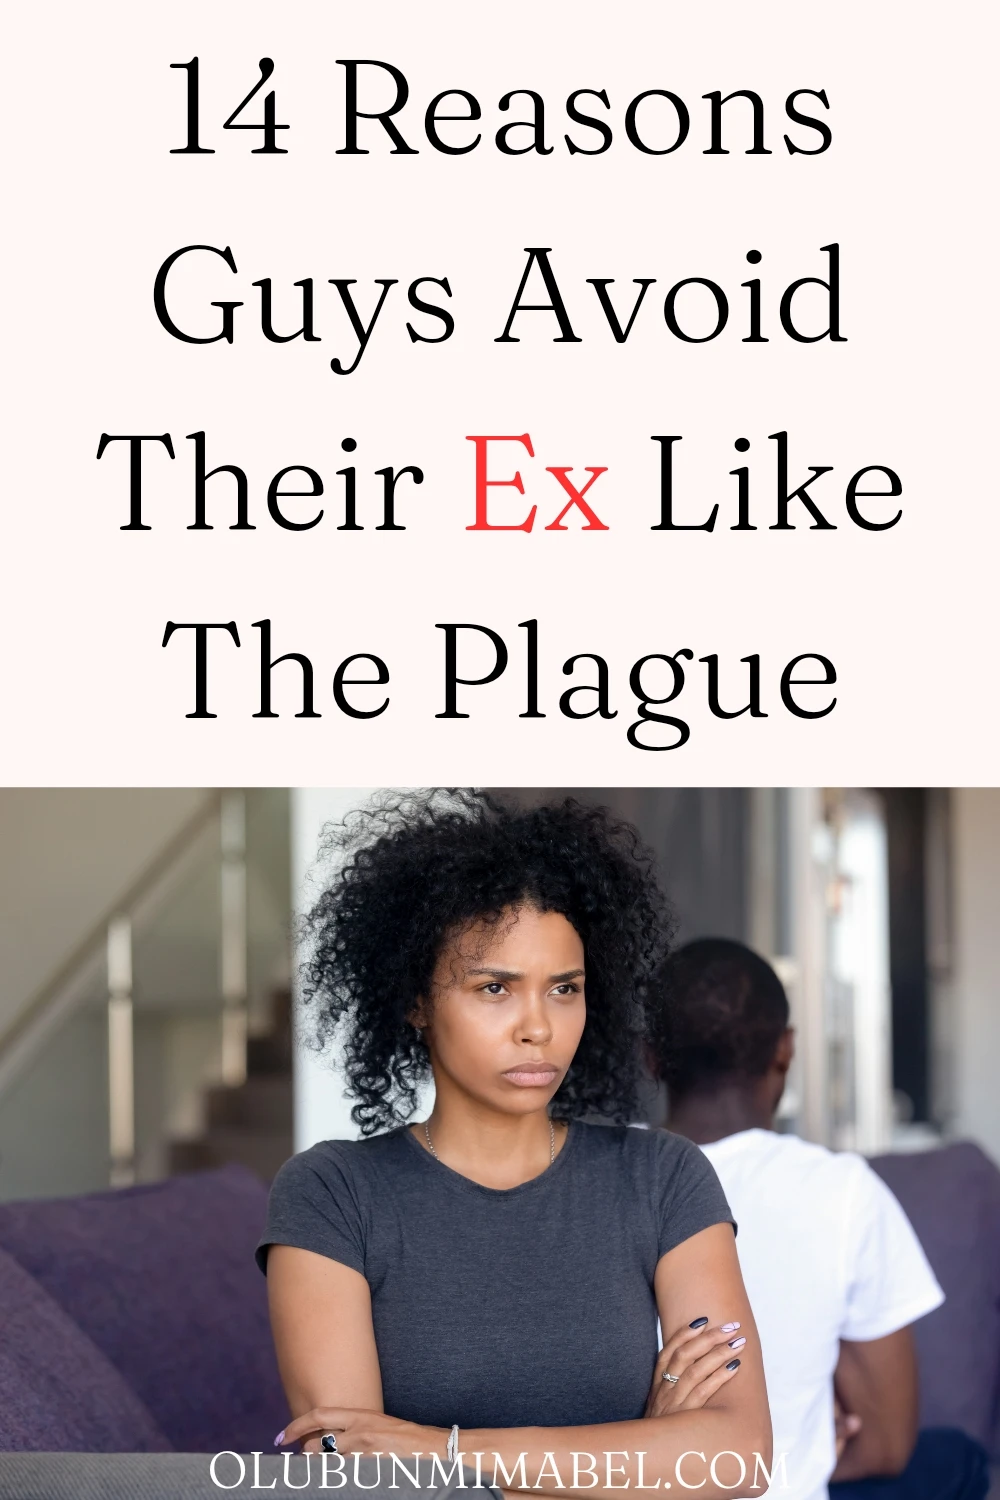 Why Do Guys Avoid Their Ex After a Breakup